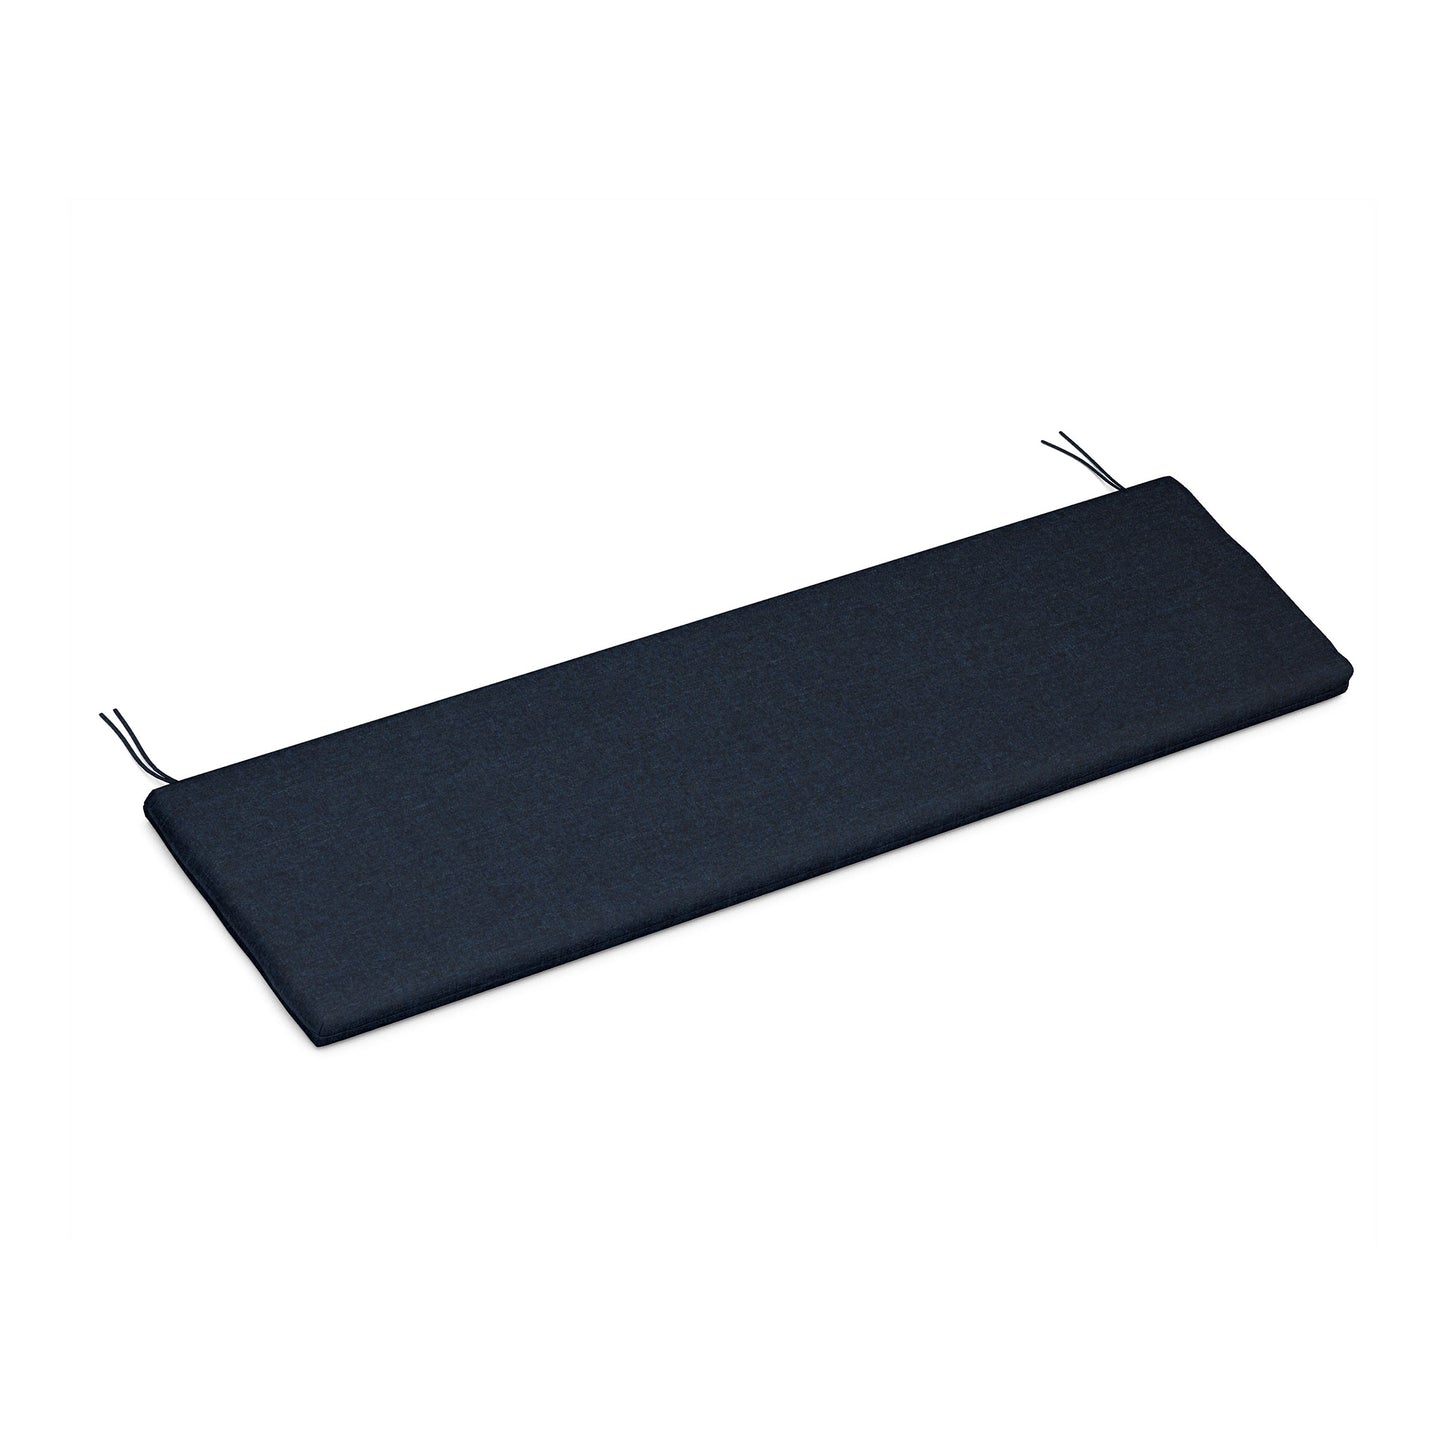 A long, rectangular, navy blue draft stopper with two small loops located at each end, pictured on a white background and crafted from weather-resistant upholstery fabric.